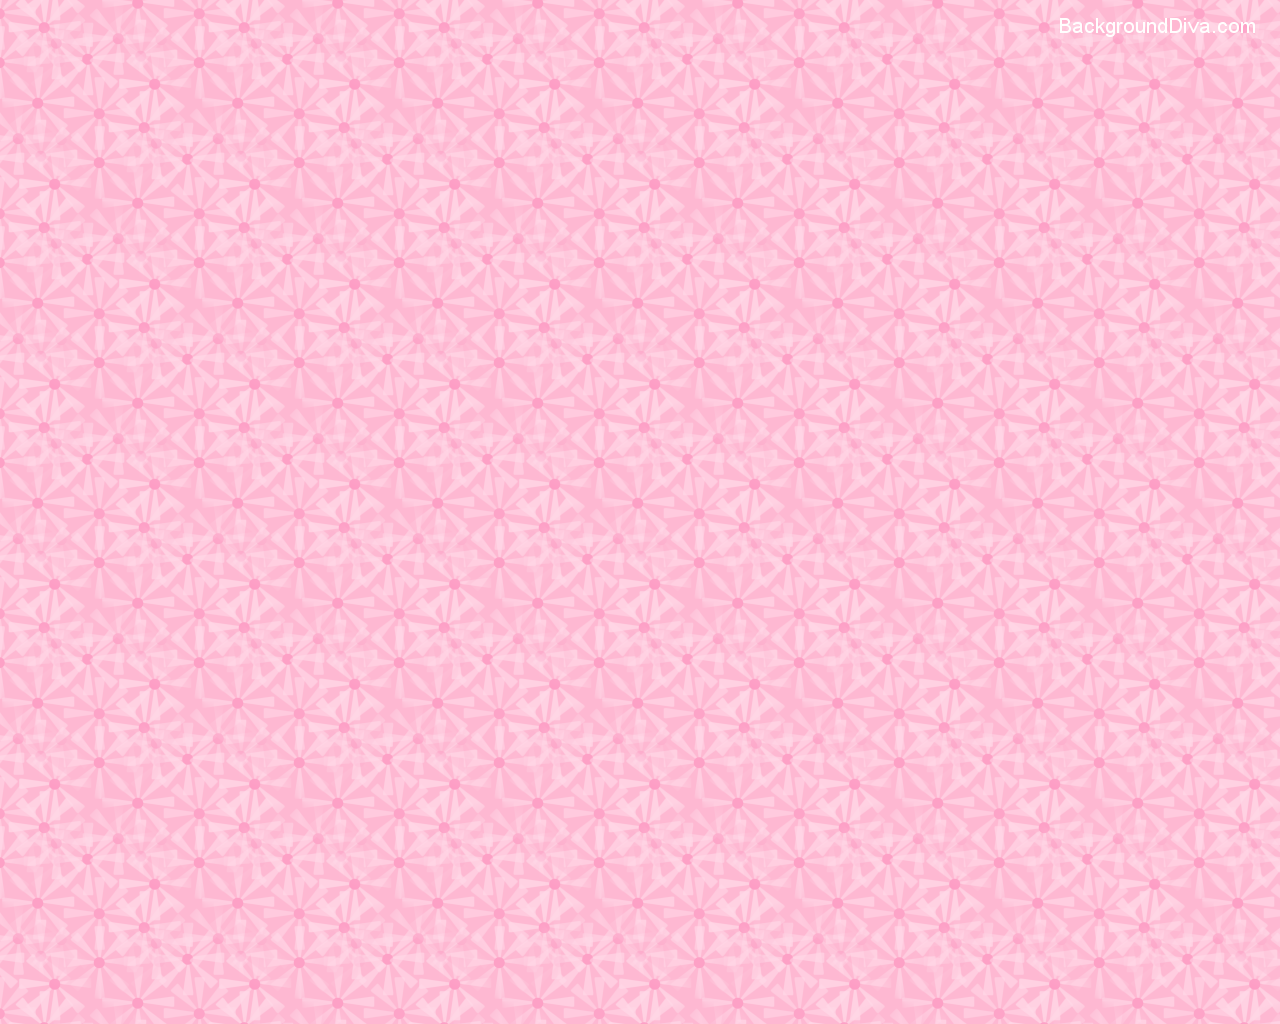 Aesthetic Baby Pink Wallpapers - Top Free Aesthetic Baby ...